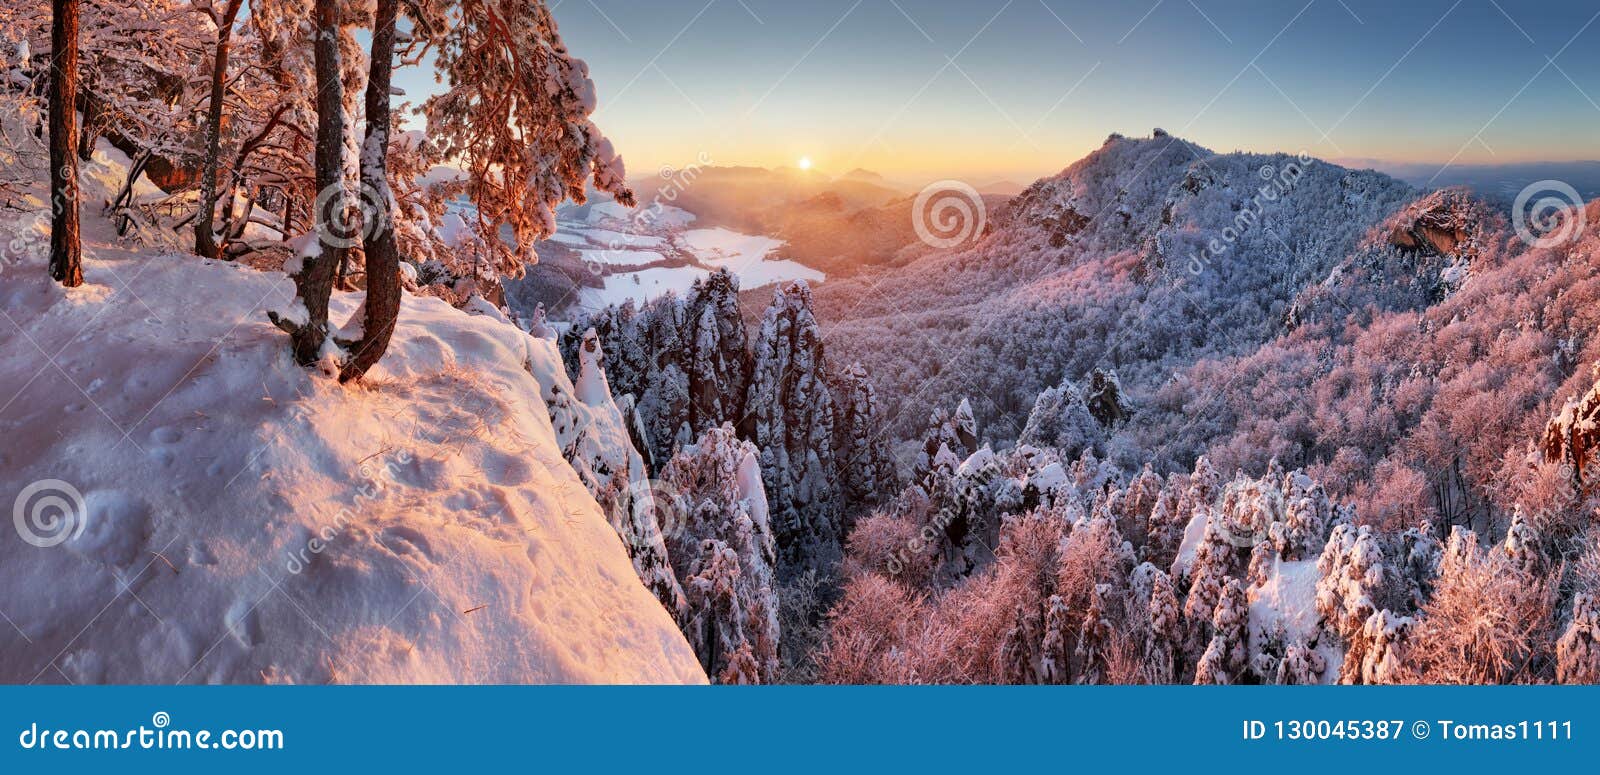 winter mountain landcape with snow forest at sunset